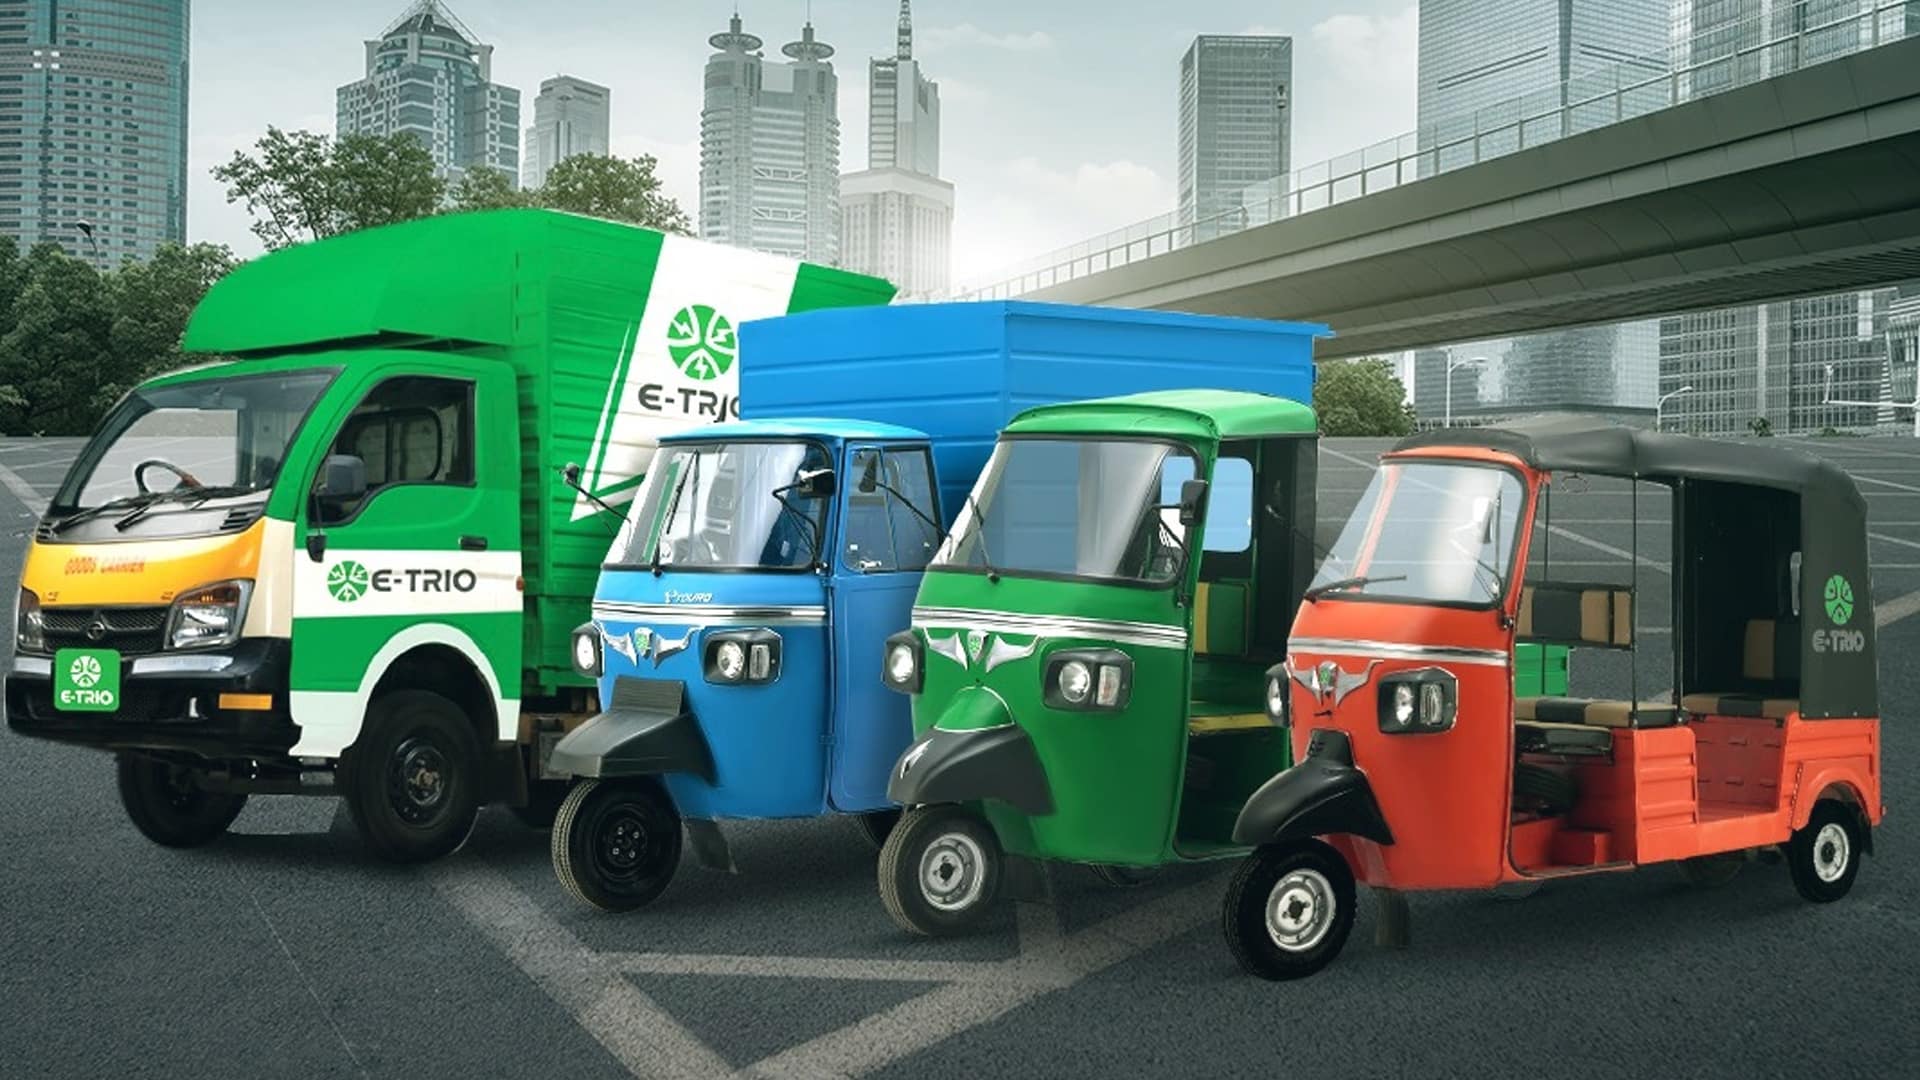 Etrio Automobiles ties up with Turno to deploy 1,000 e-3-wheelers pan-India in next 12 months